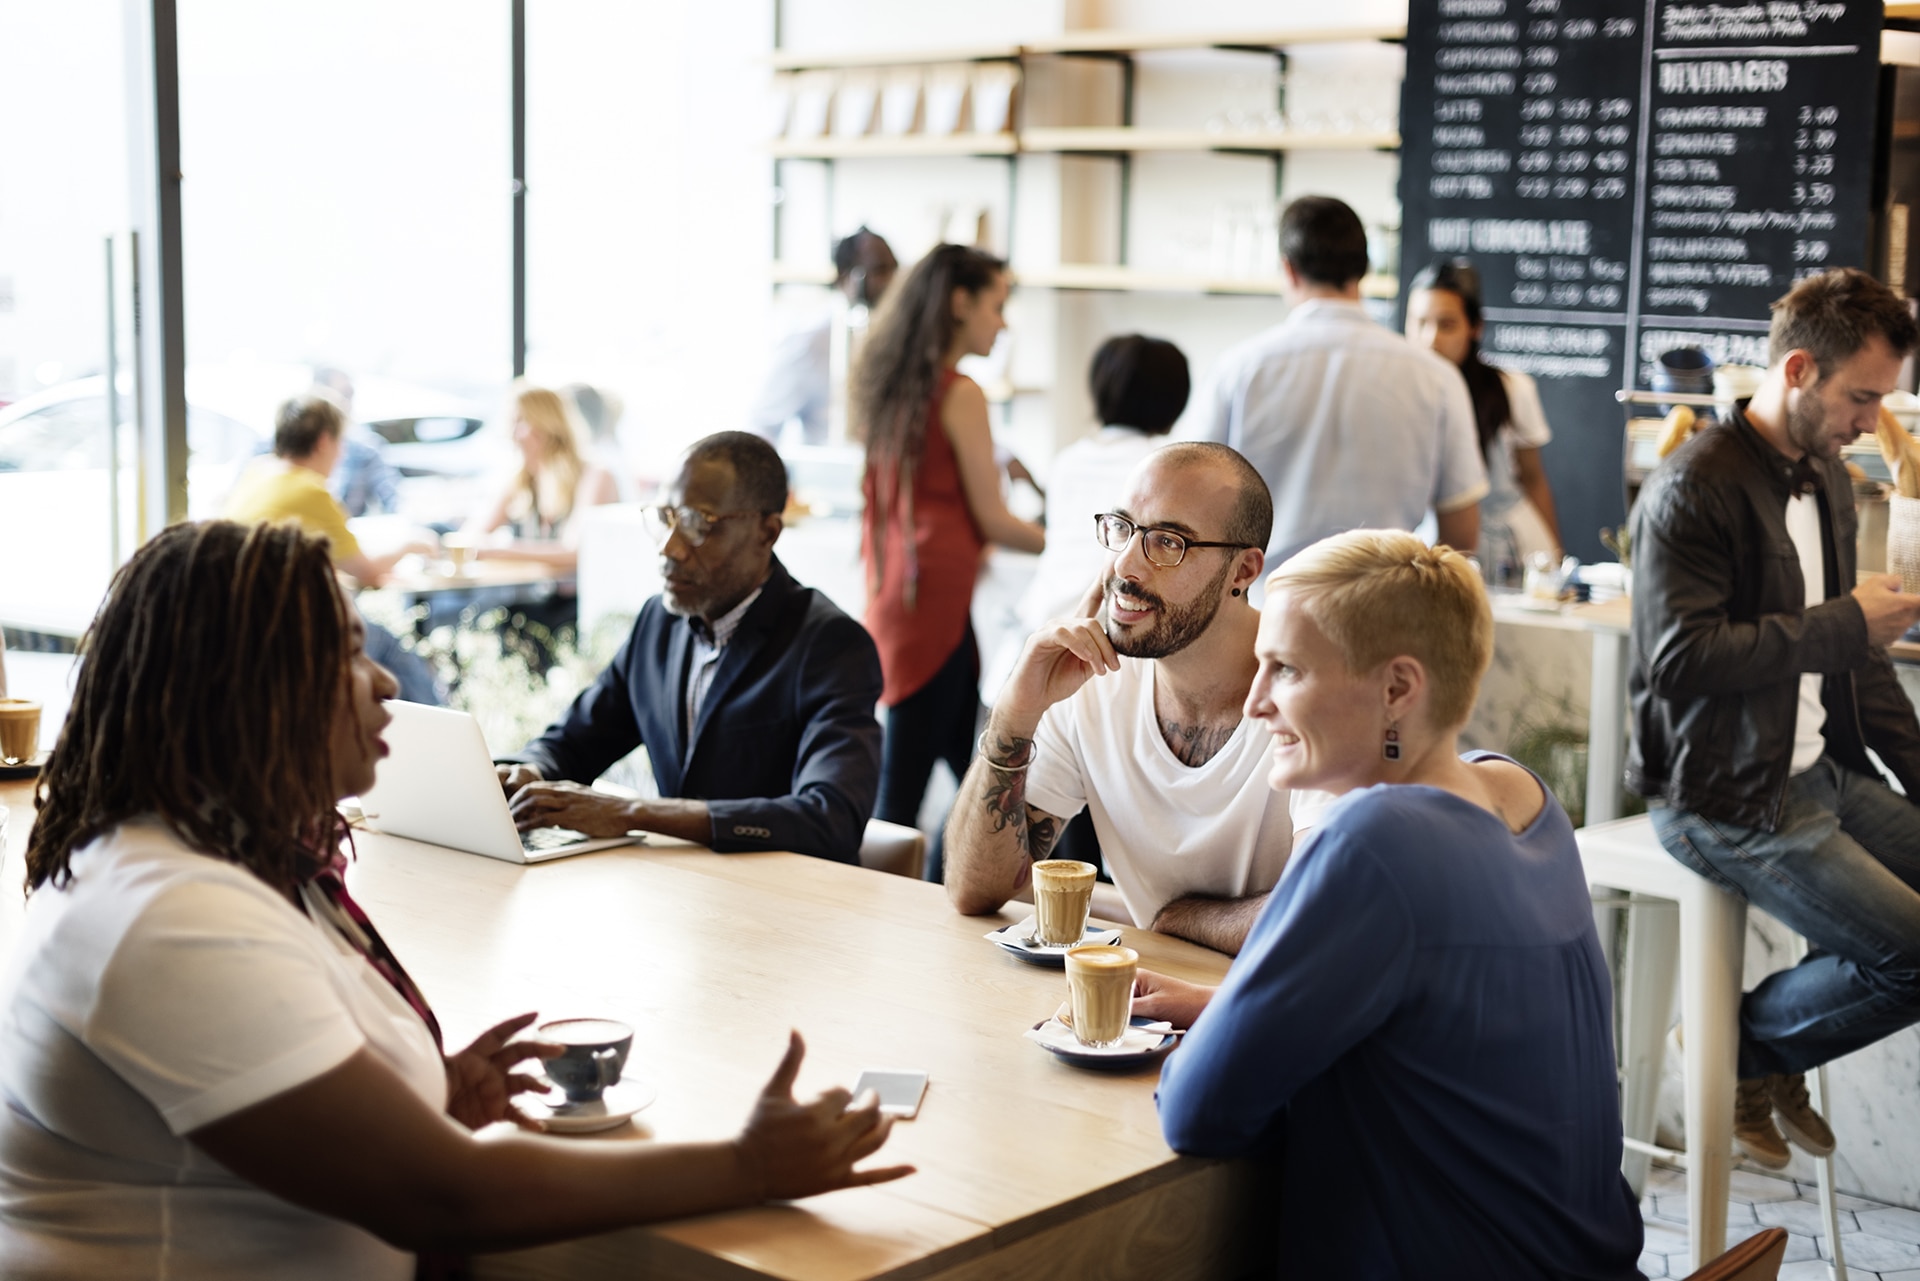 Diversity Friends Meeting Coffee Shop Brainstorming Concept; Shutterstock ID 390186520; purchase_order: -; job: -; client: -; other: -